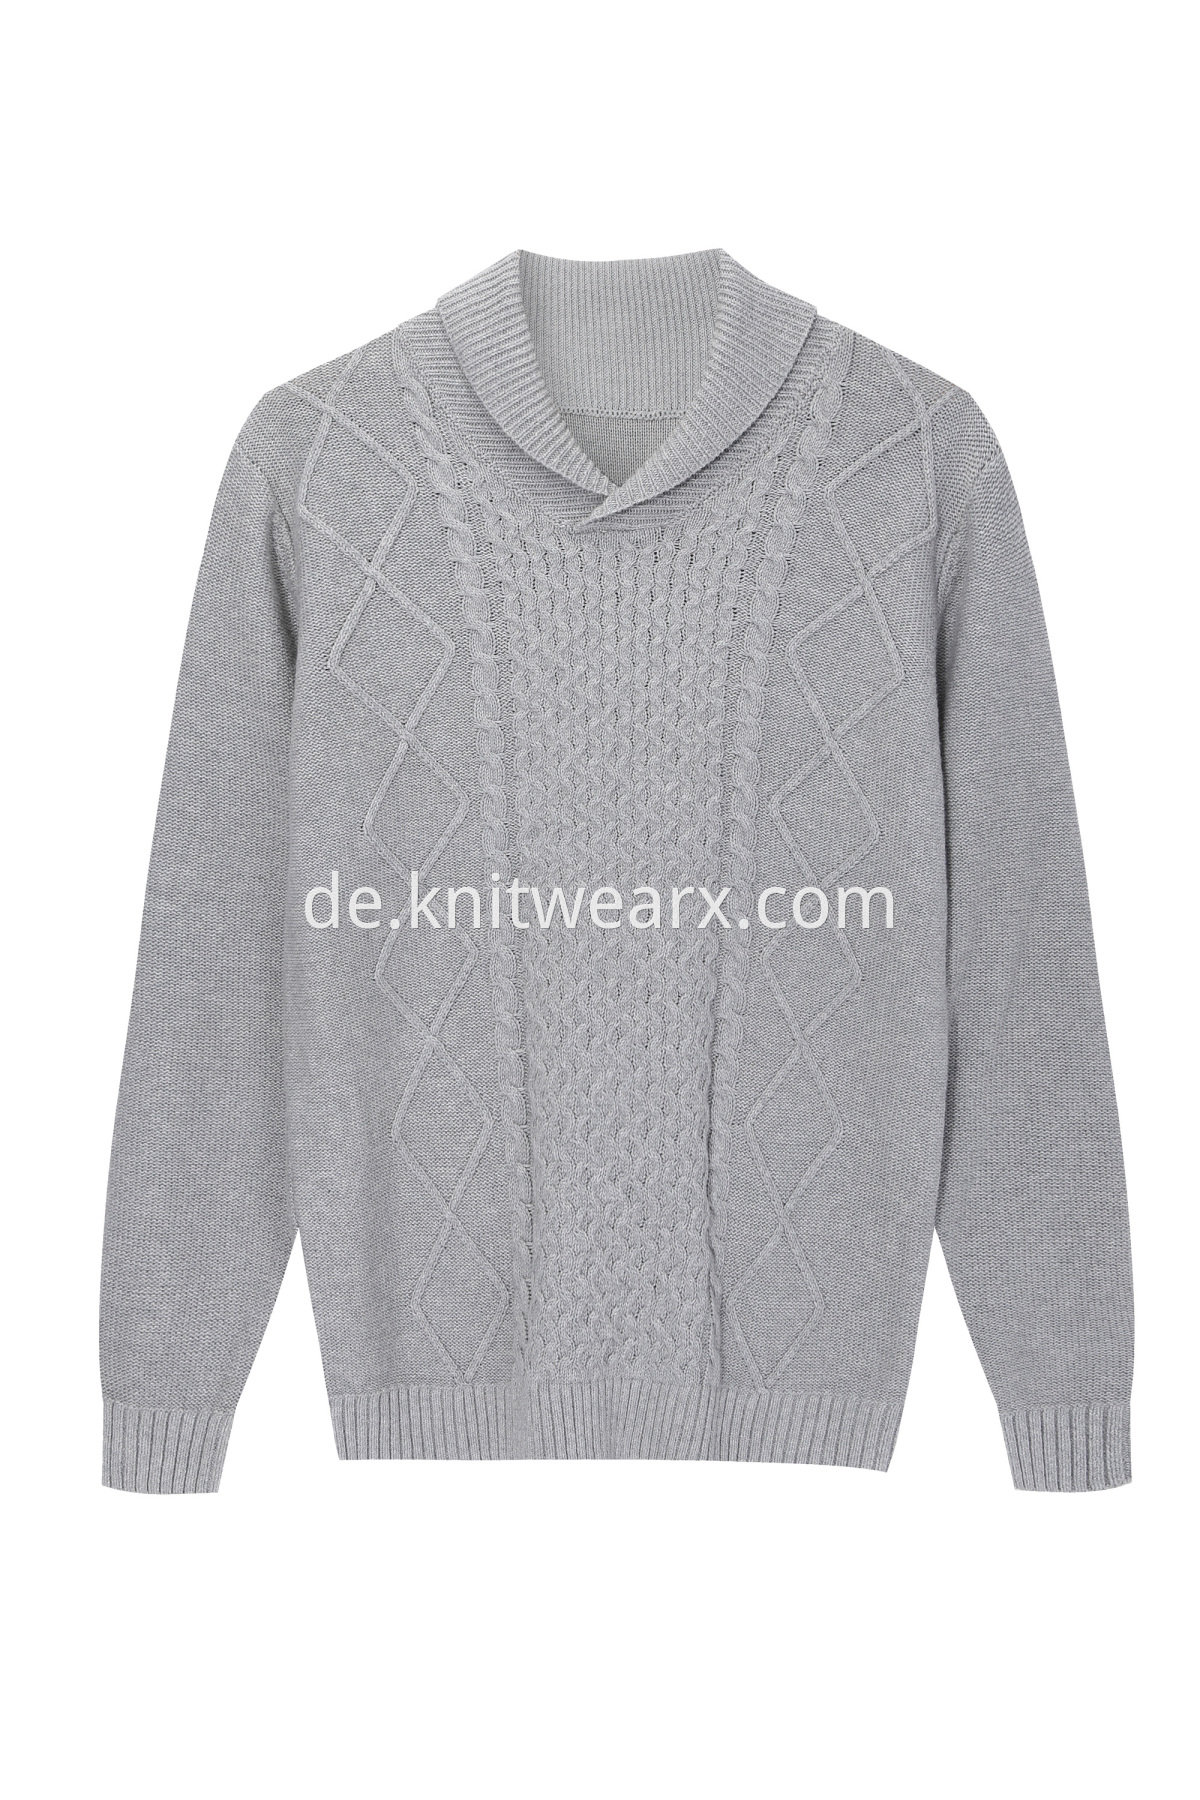 Men's Shawl Collar Sweaters Cotton Relaxed Fit Cable Pullover